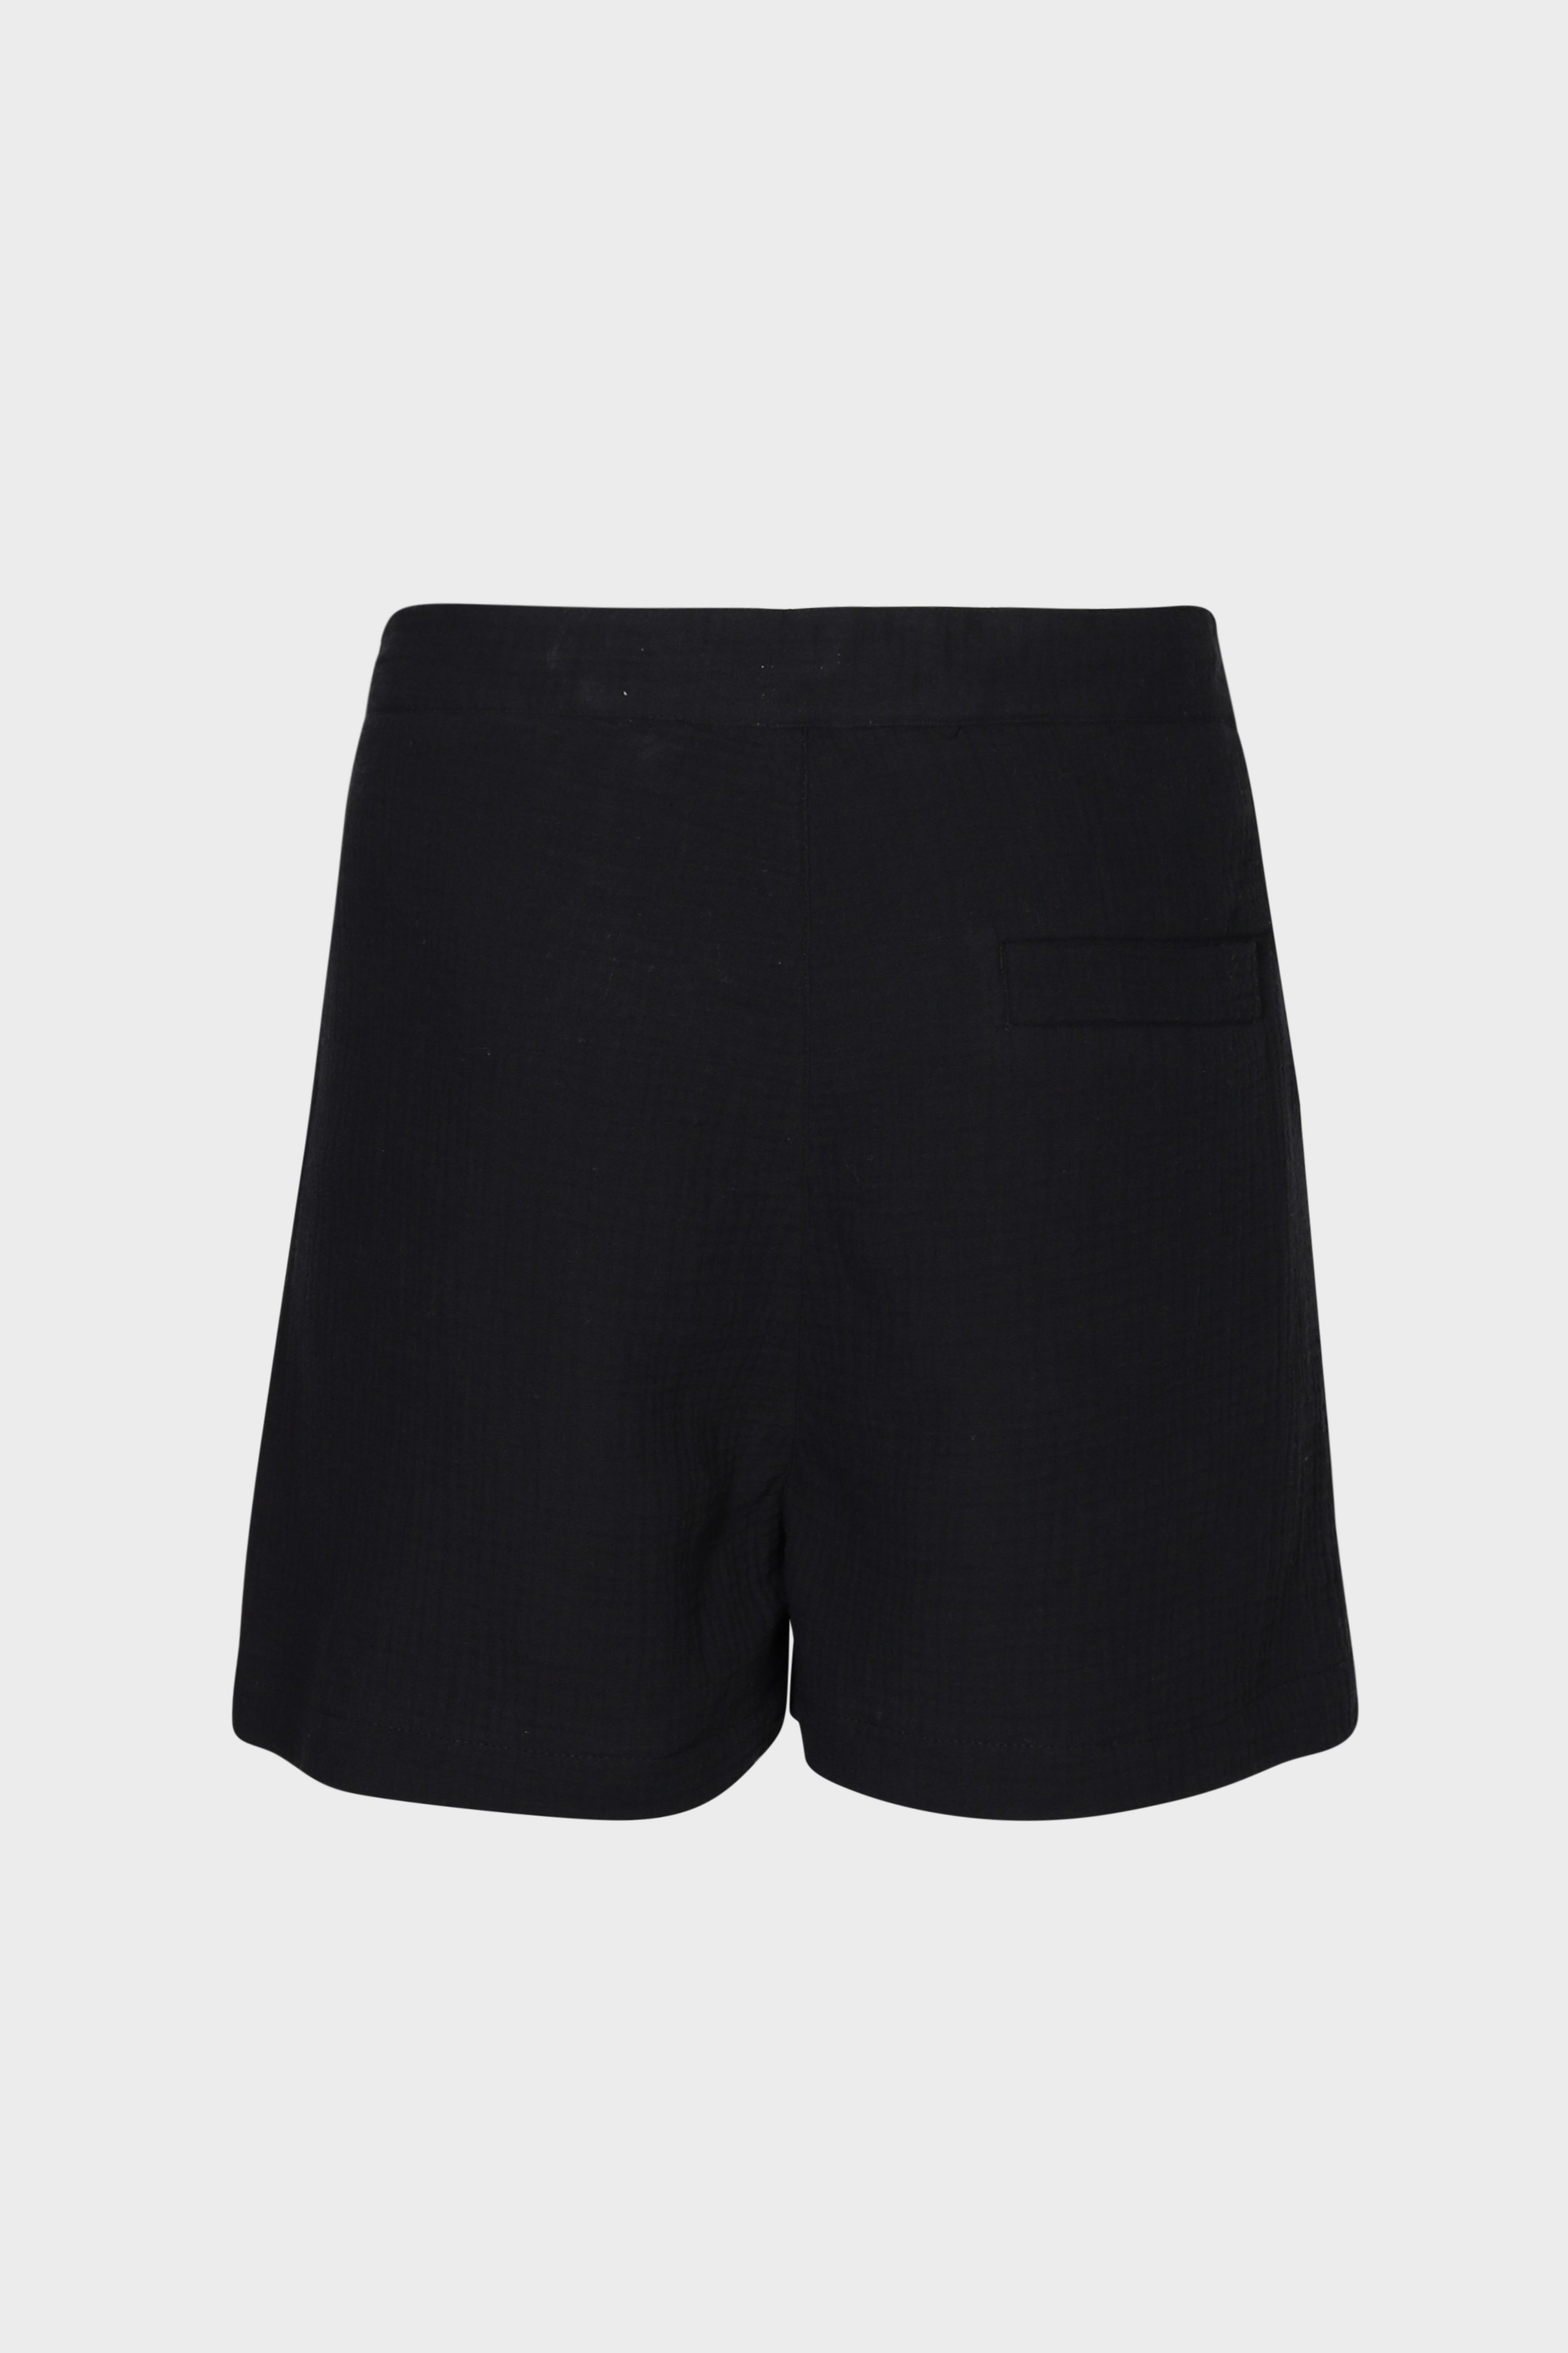 HANNES ROETHER Mousseline Shorts in Black L